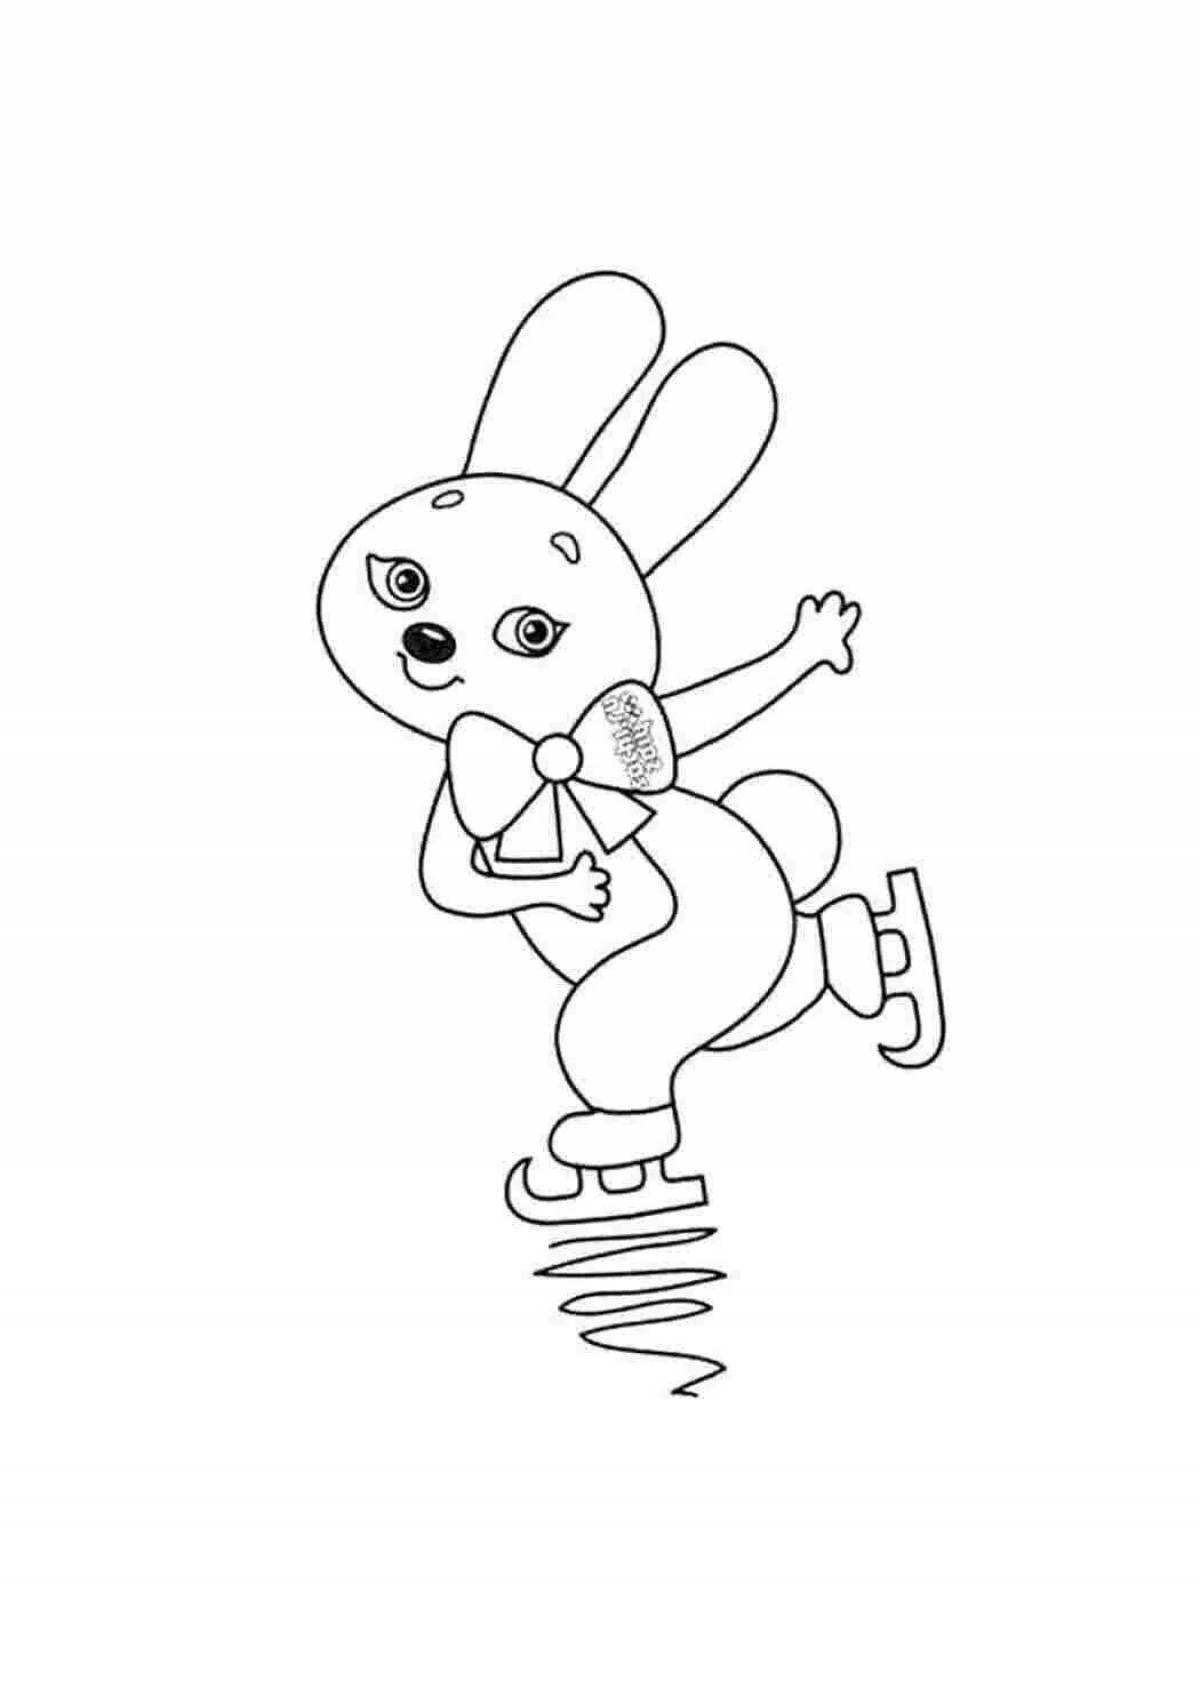 Coloring book dazzling hare